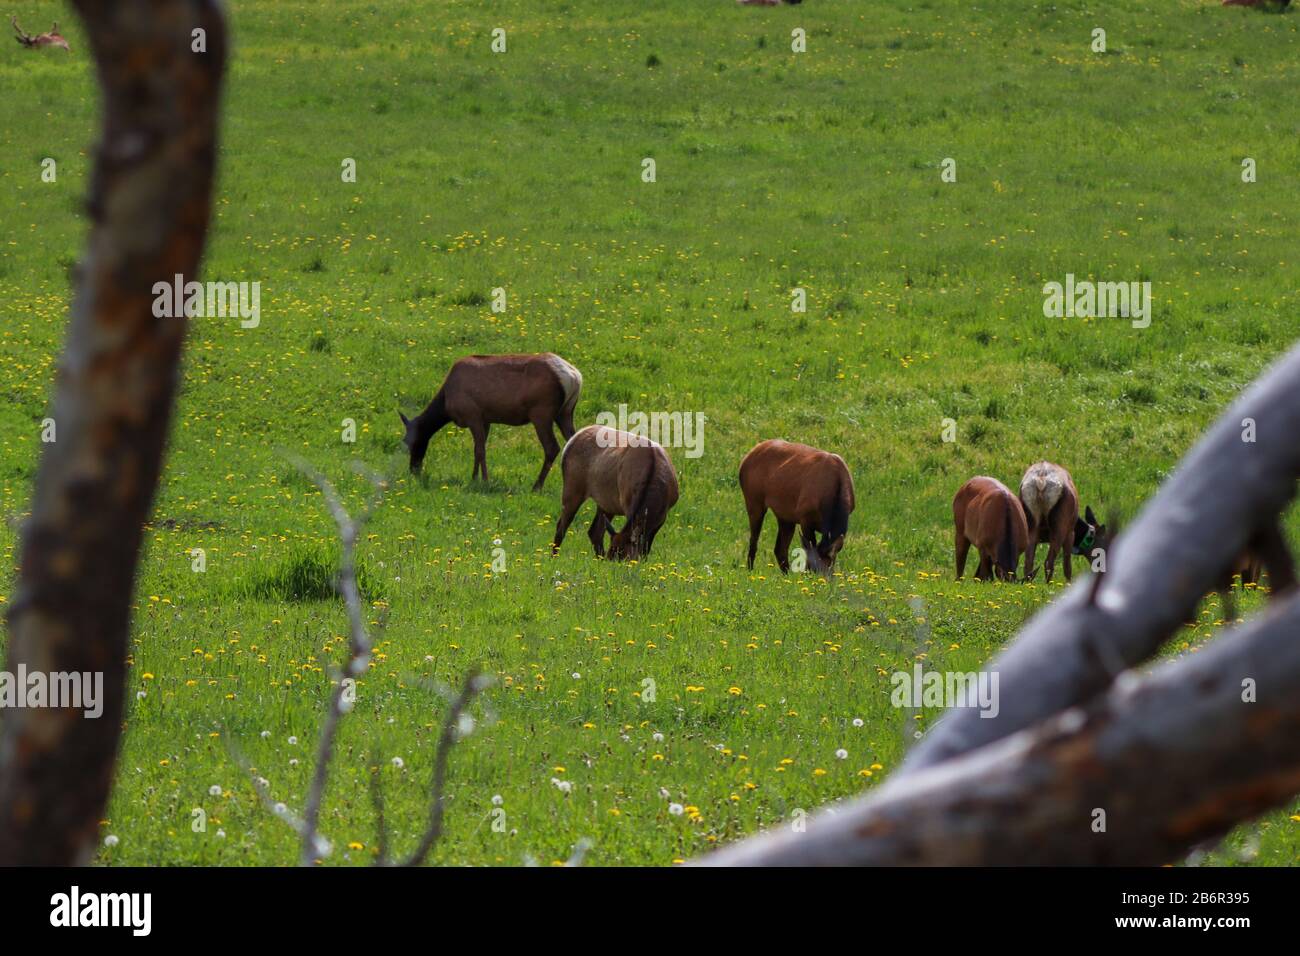 A herd of elk grazing on a lush green field. High quality photo Stock Photo